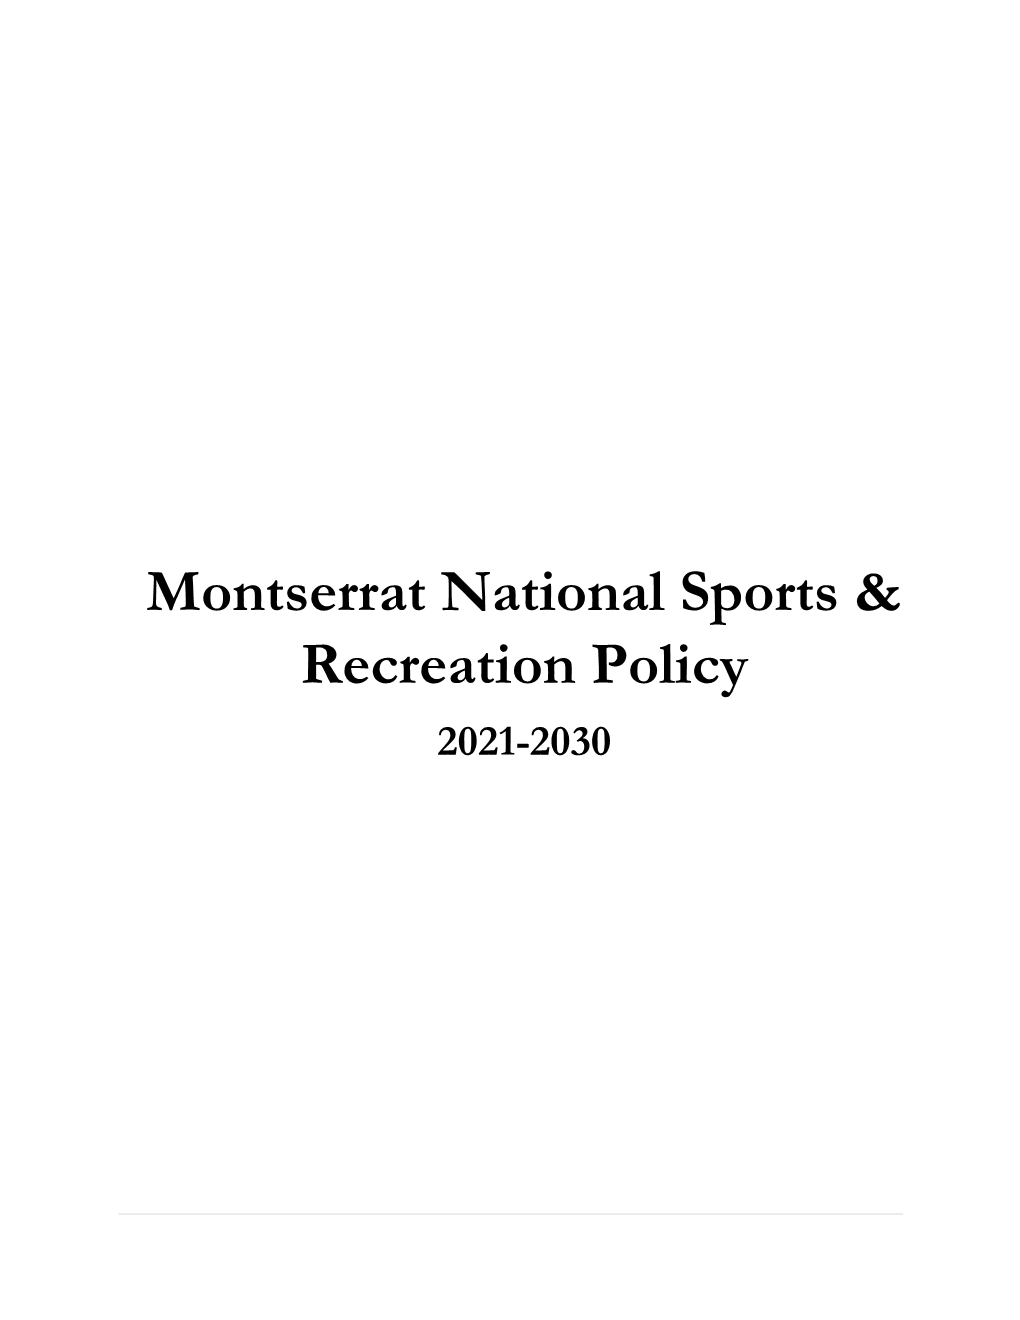 Montserrat National Sports and Recreation Policy 2021-2030